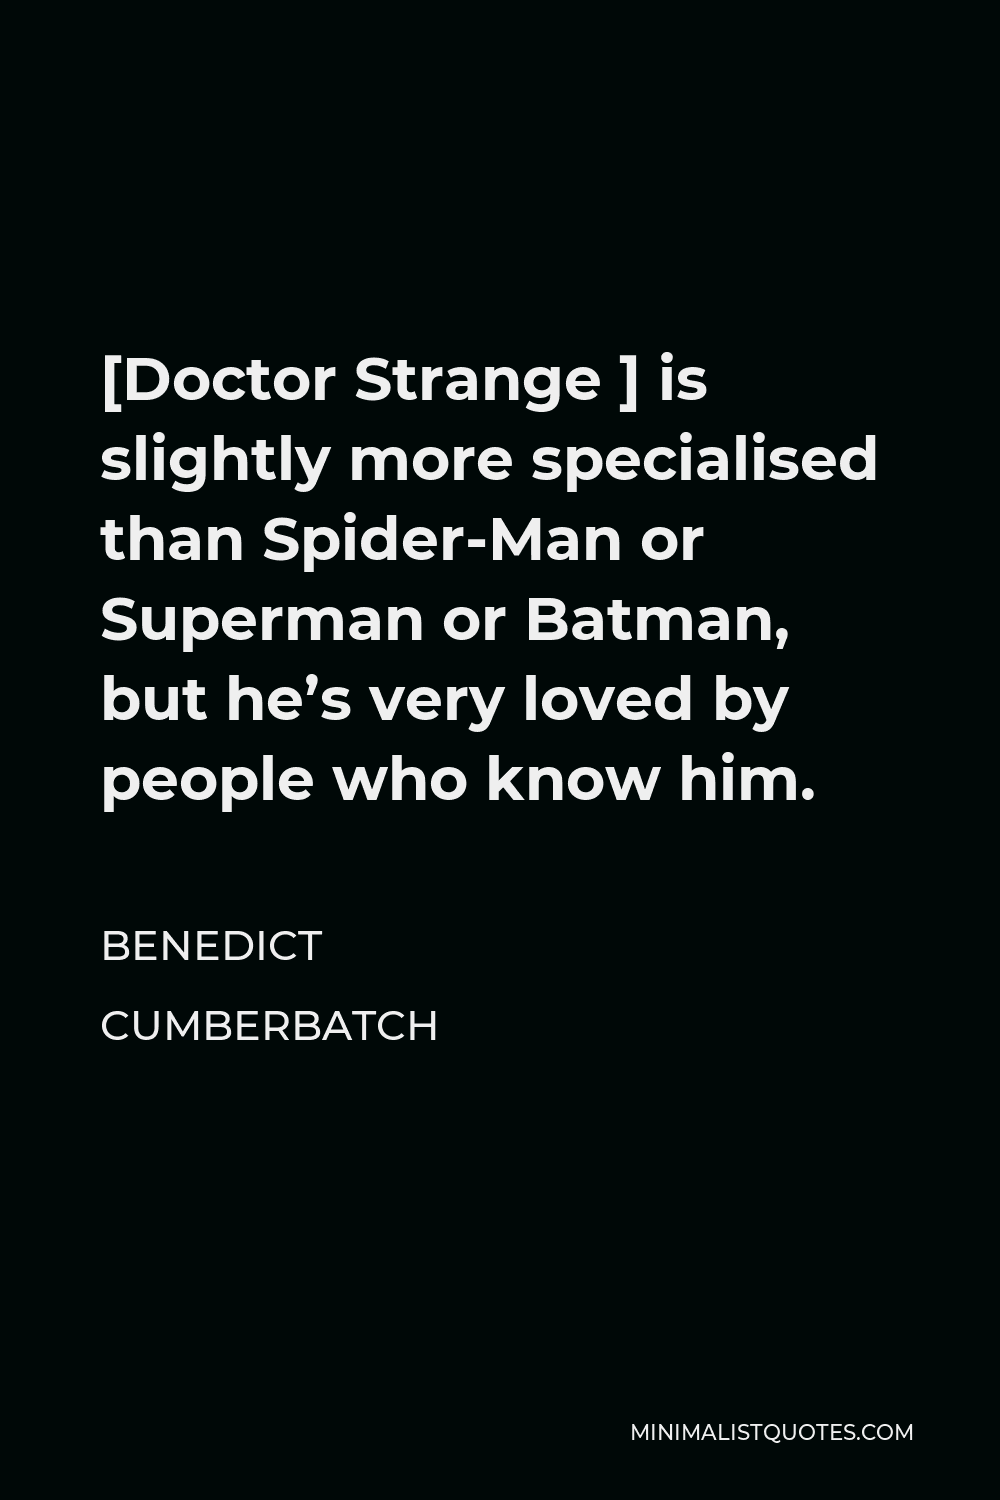 Benedict Cumberbatch Quote - [Doctor Strange ] is slightly more specialised than Spider-Man or Superman or Batman, but he’s very loved by people who know him.